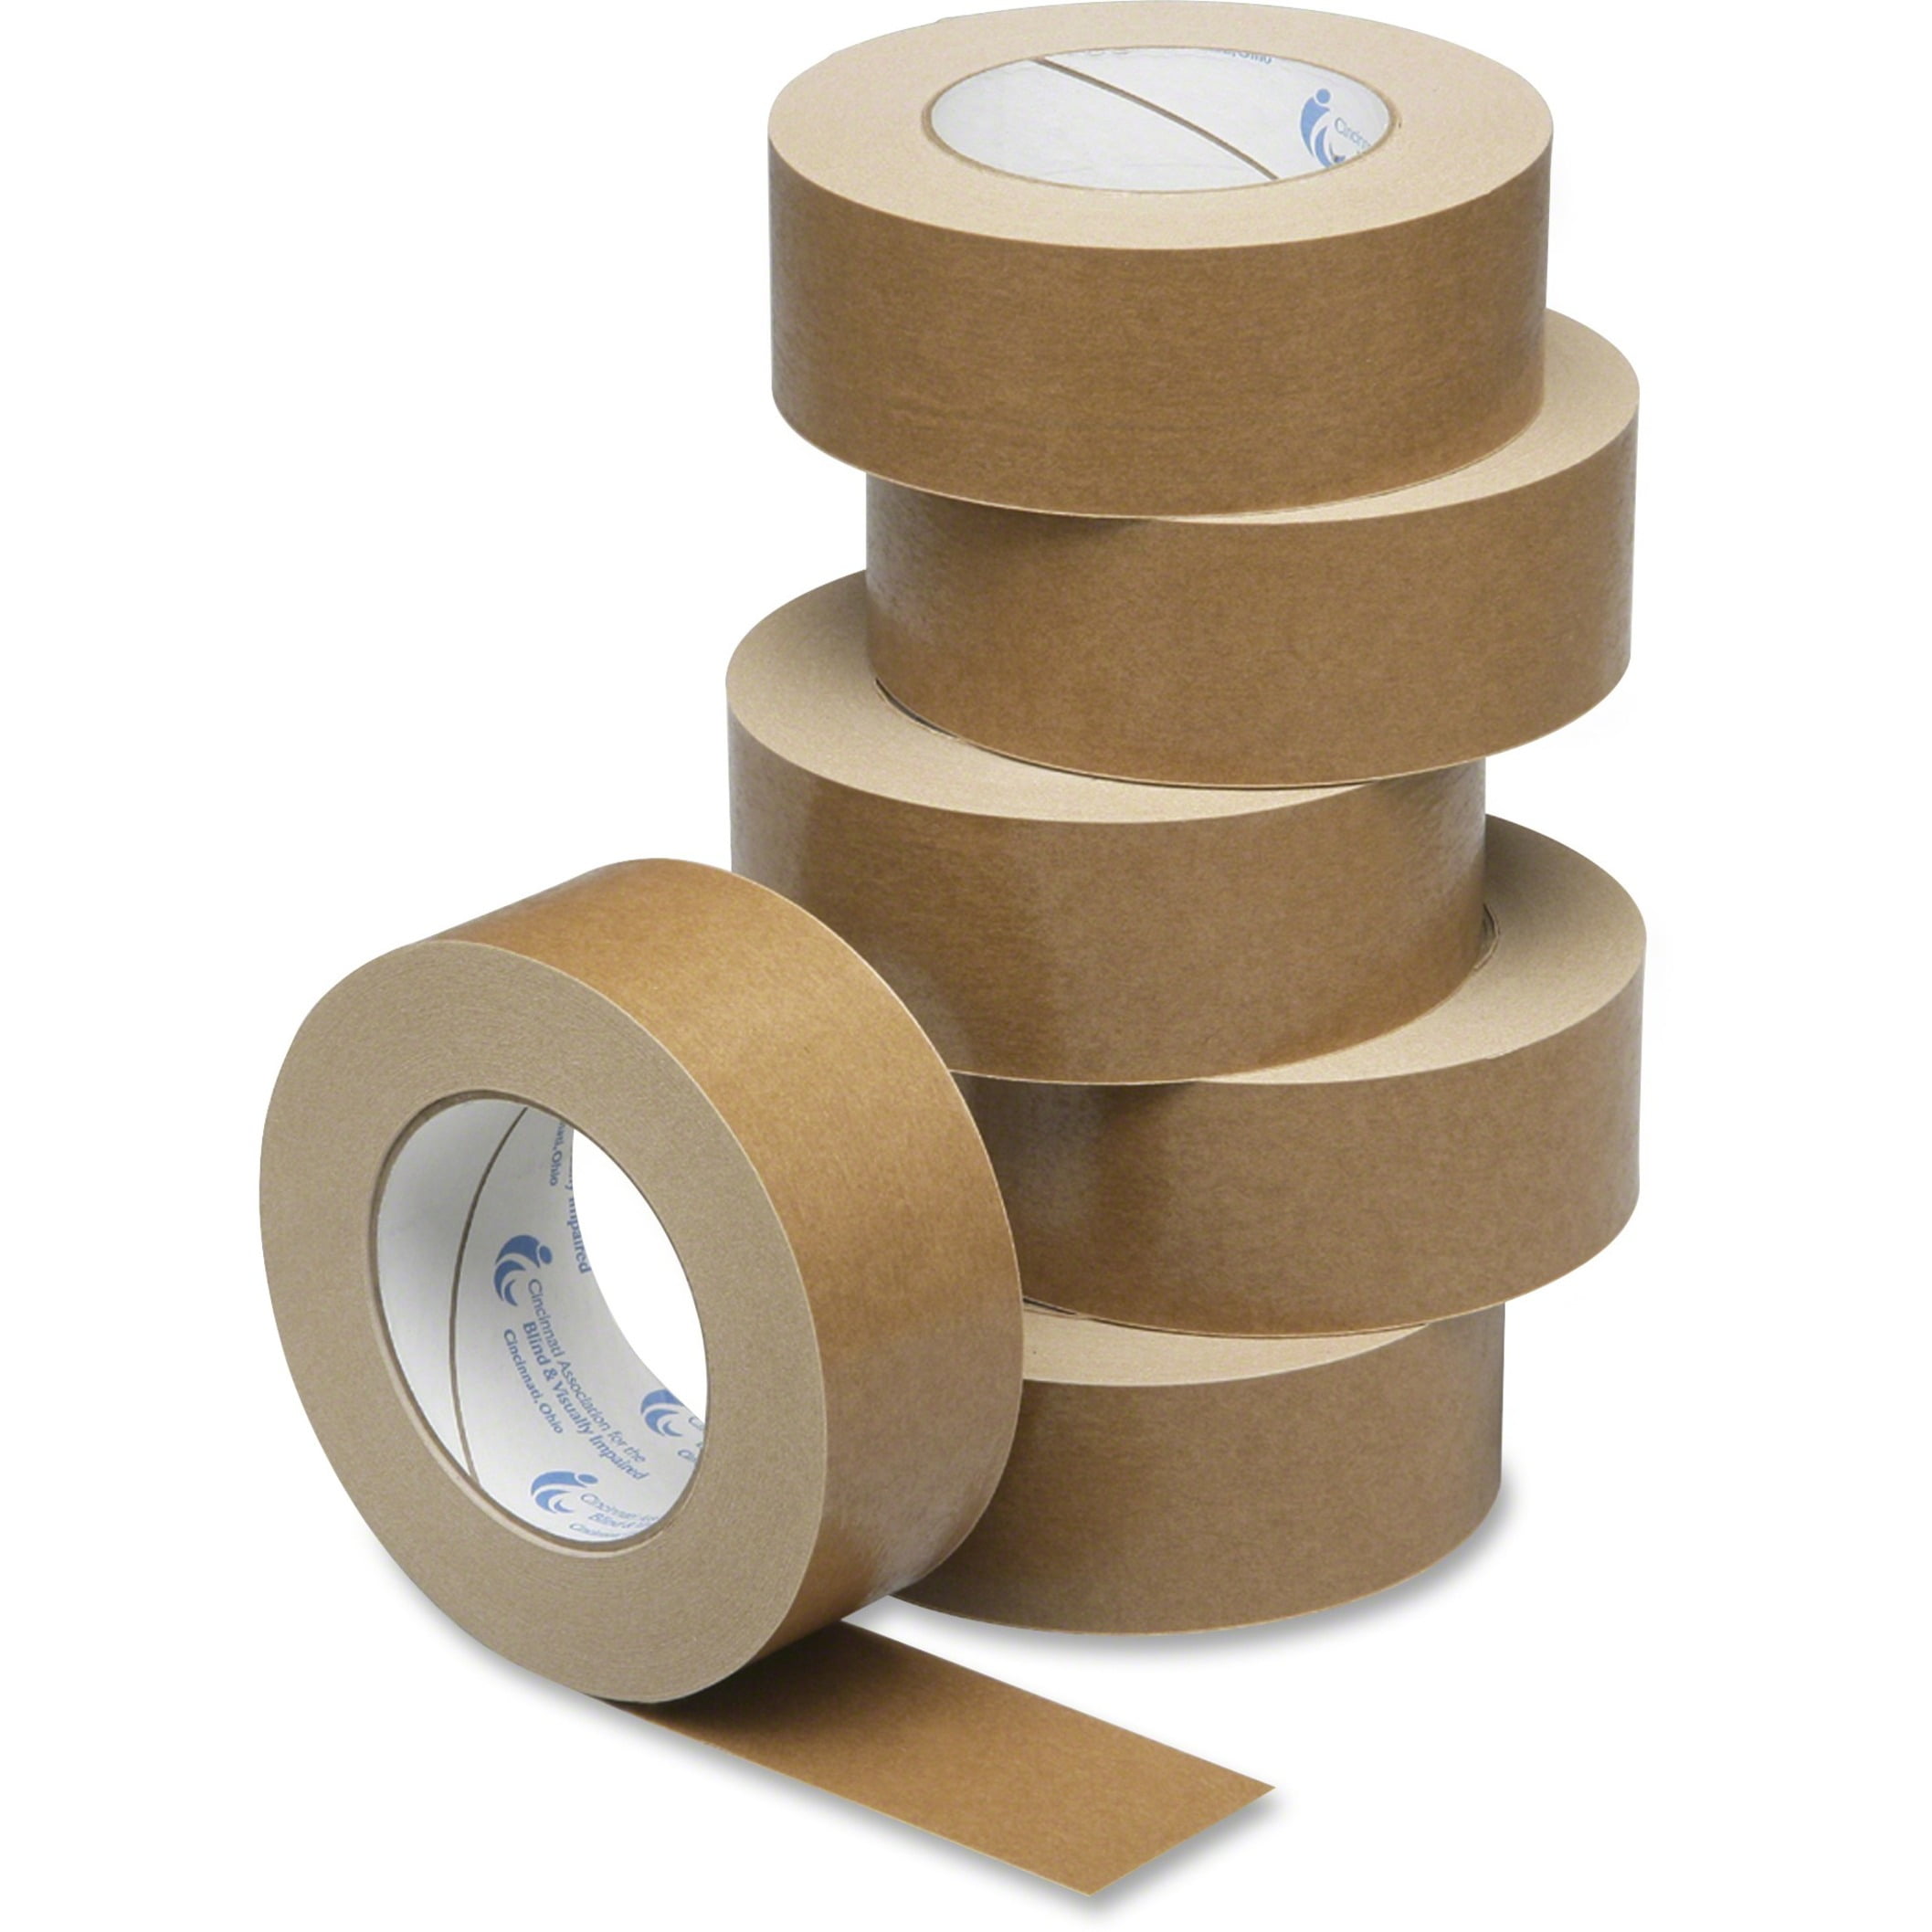 American Crafts Sticky Thumb Adhesives Low Tack Mask Tape 2 Inch x 11 Yards  260